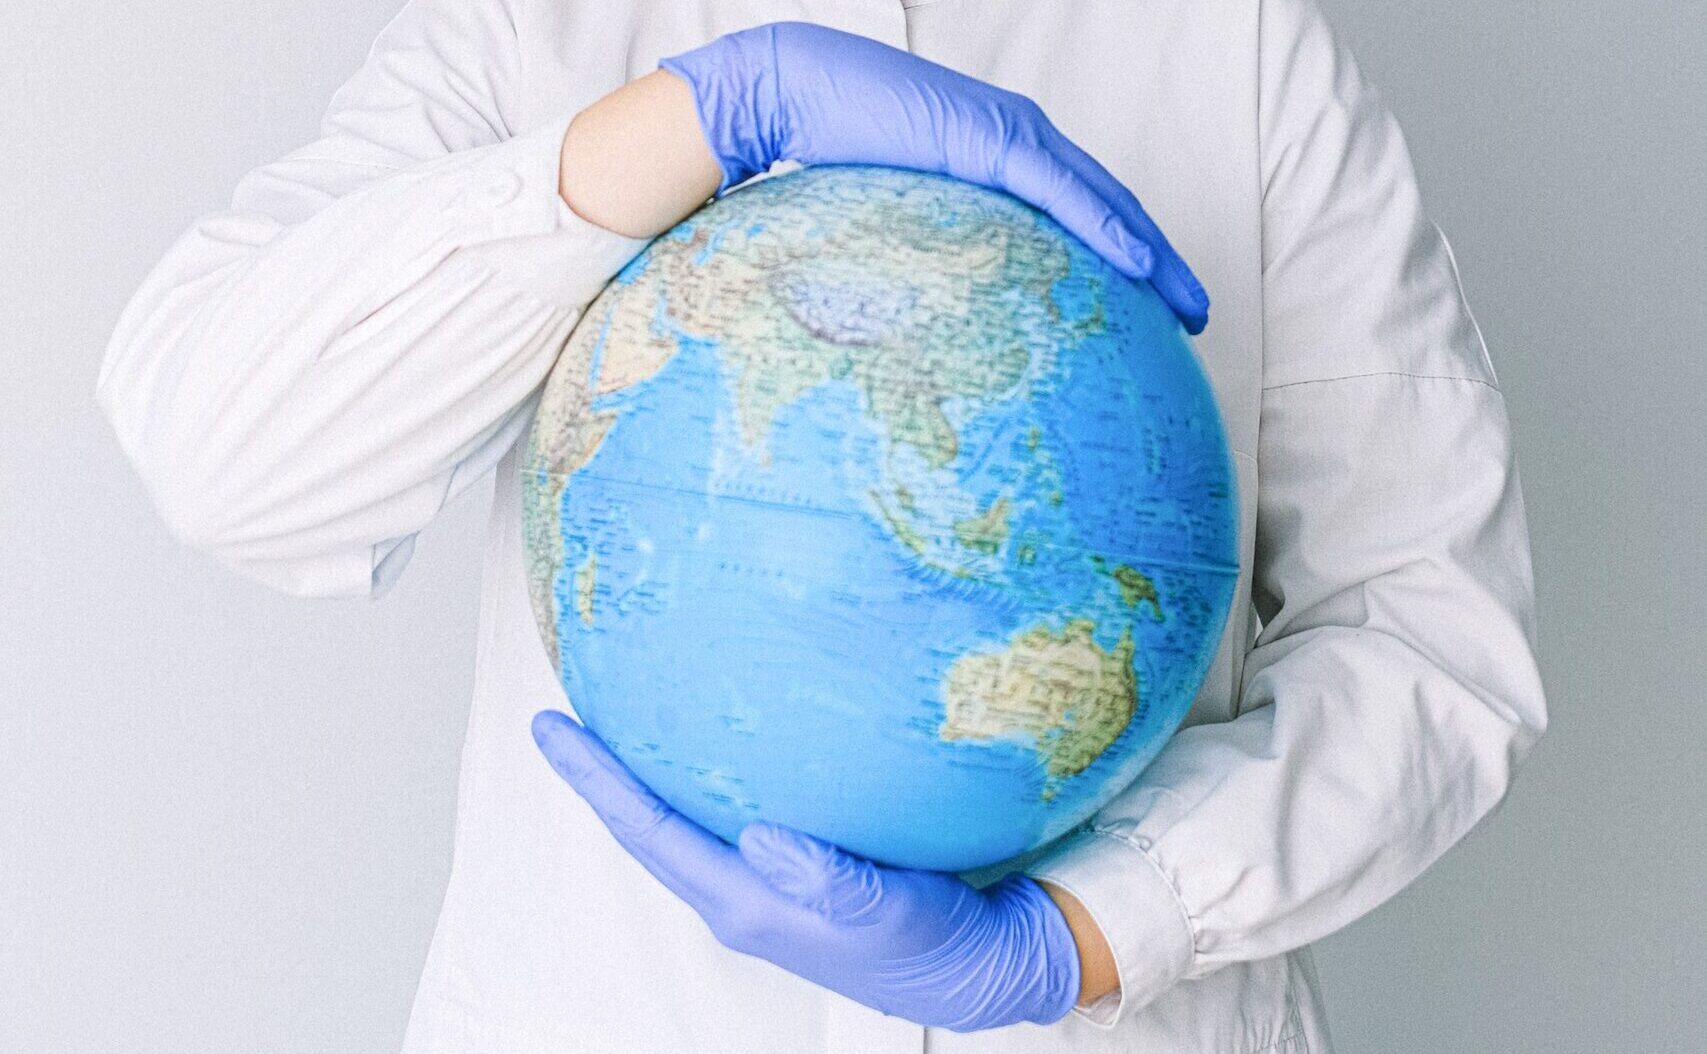 Person wearing a clinical white coat and gloves holding a globe